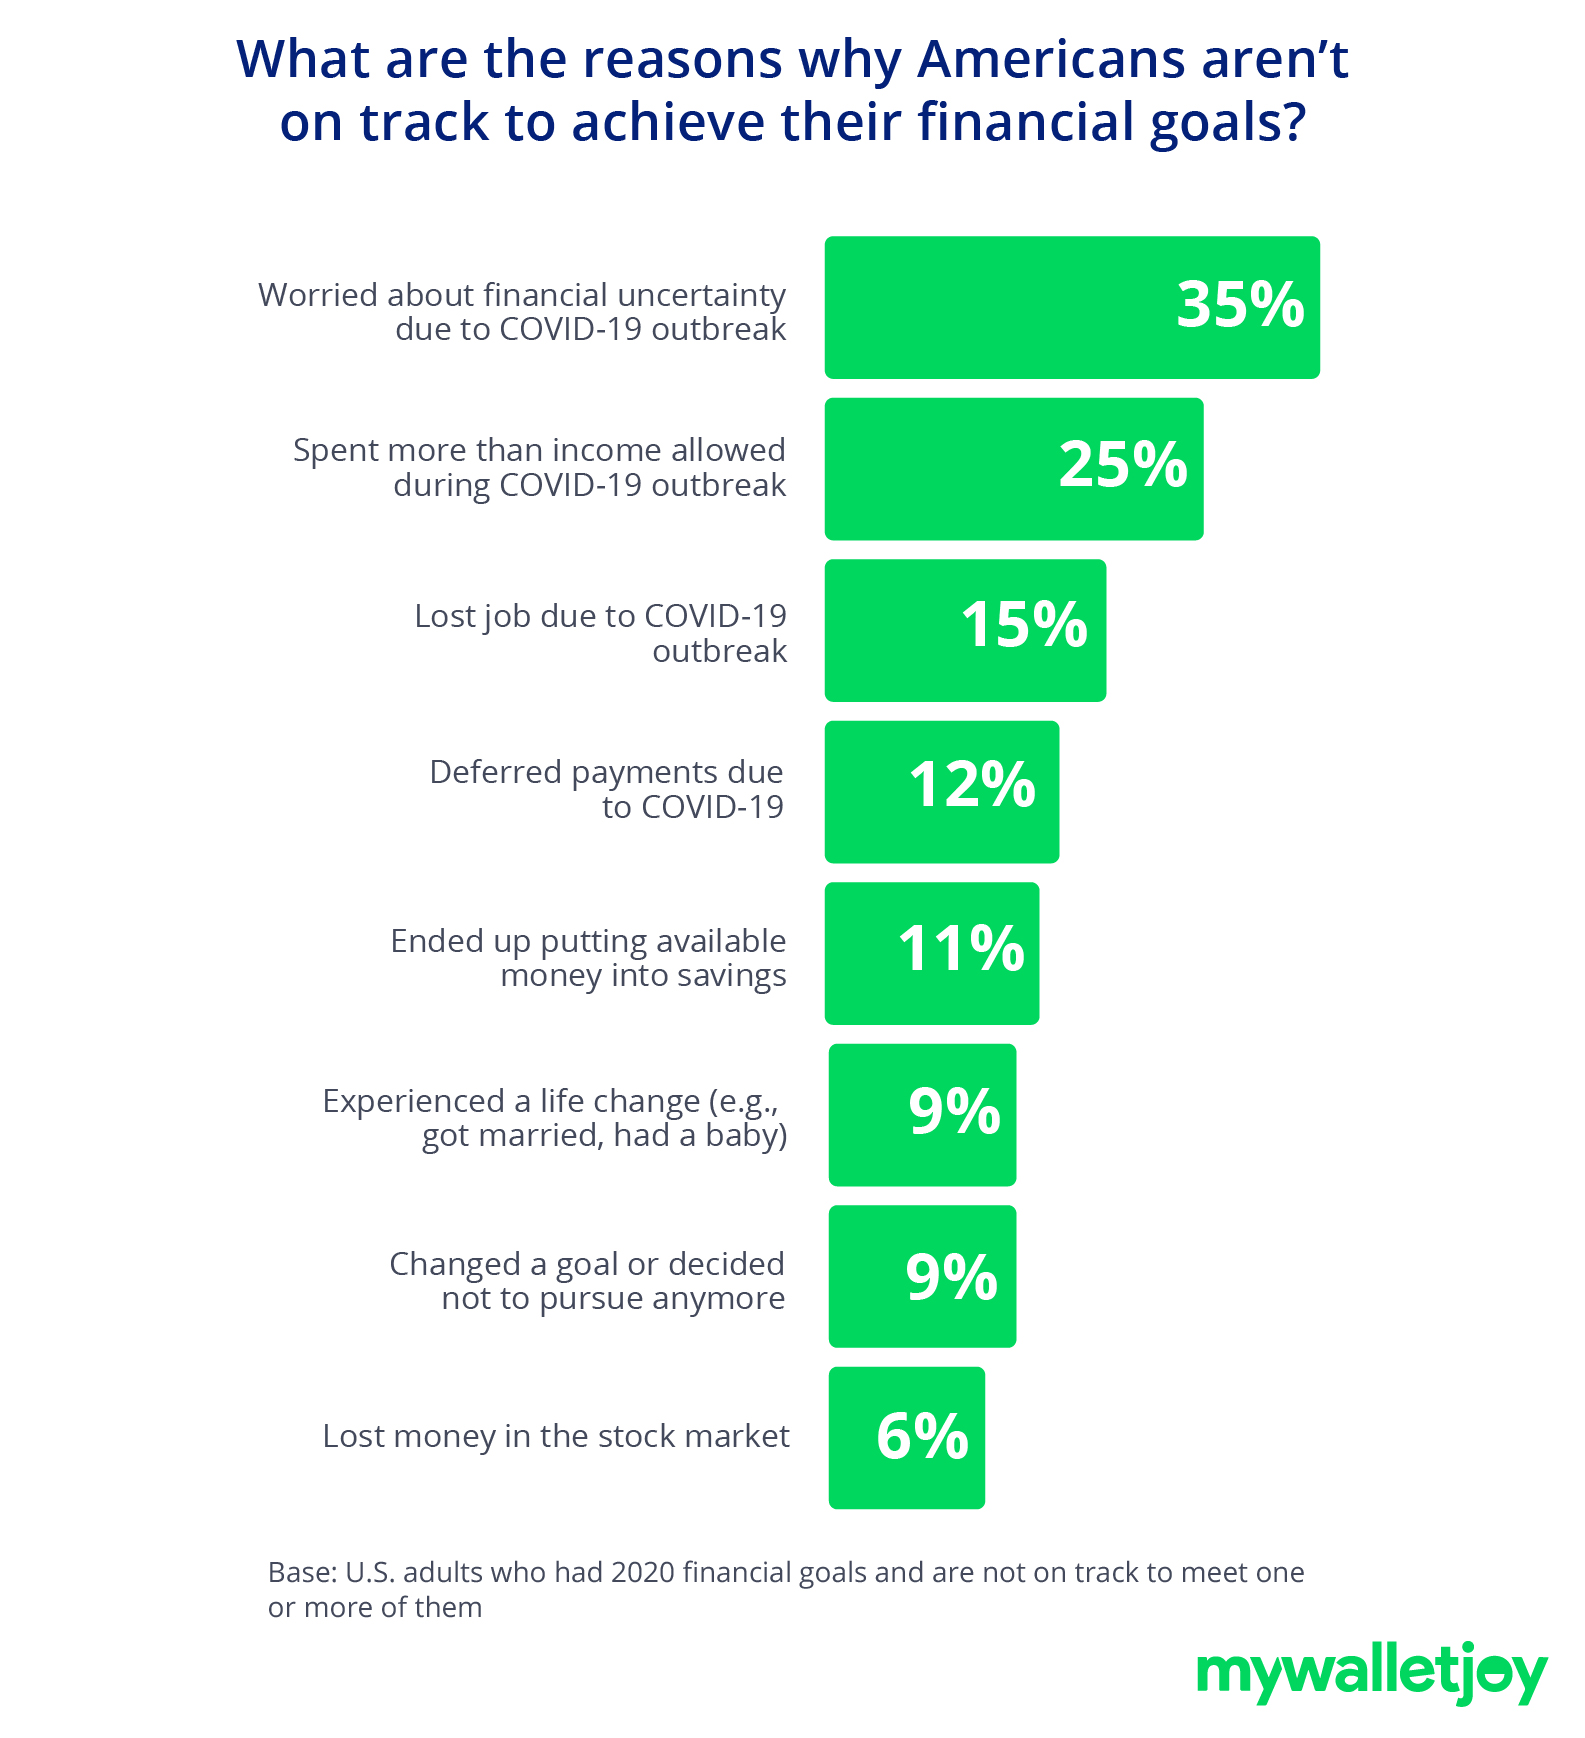 a visual representation of why Americans aren't on track to achieve their financial goals